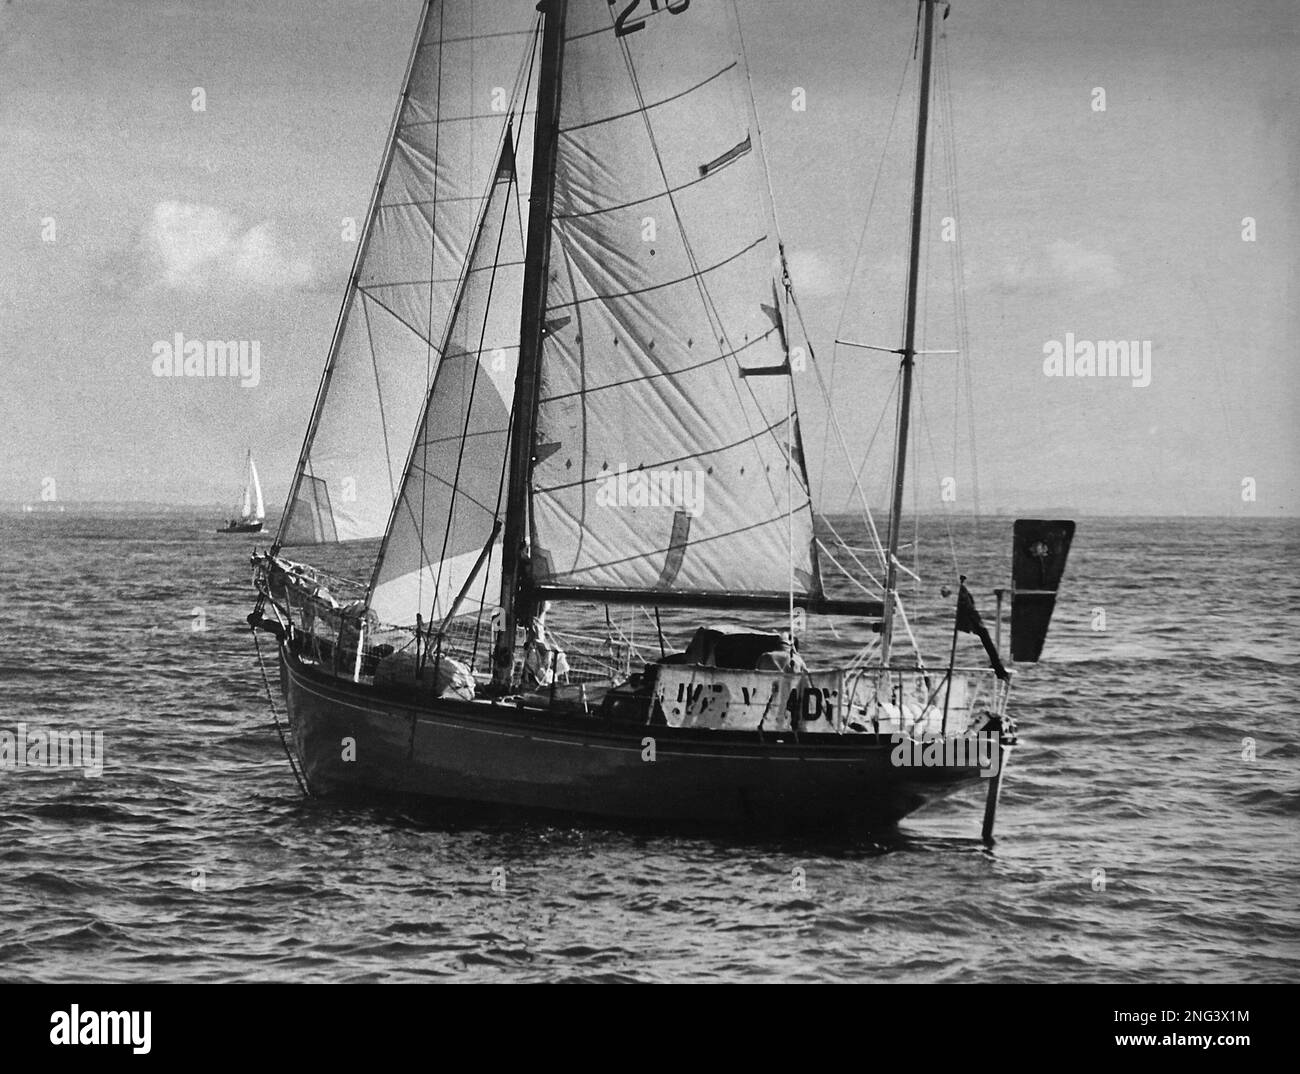 AJAXNETPHOTO. 4 JULY, 1968. SOUTHSEA, ENGLAND. - SAILING GROCER RETURNS - ALEC ROSE AT THE HELM OF HIS 36FT KETCH LIVELY LADY AS SHE RETURNED TO PORTSMOUTH AT THE END OF HIS SOLO ROUND THE WORLD VOYAGE. THE GREENGROCER FROM SOUTHSEA SAILED FROM THE CITY ON JULY 16TH, 1967. HIS WAS THE ONLY YACHT UNDER 40FT TO HAVE SAILED AROUND THE WORLD WITH TWO STOPS OR LESS AND THE SECOND YACHT OF ANY SIZE TO HAVE COMPLETED THE 28,000 MILE VOYAGE. ROSE WAS ALSO THE SECOND GROCER IN HISTORY TO BE ELECTED A MEMBER OF THE ROYAL YACHT SQUADRON.(FIRST WAS SIR THOMAS LIPTON). PHOTO:JONATHAN EASTLAND/AJAX REF:0719 Stock Photo